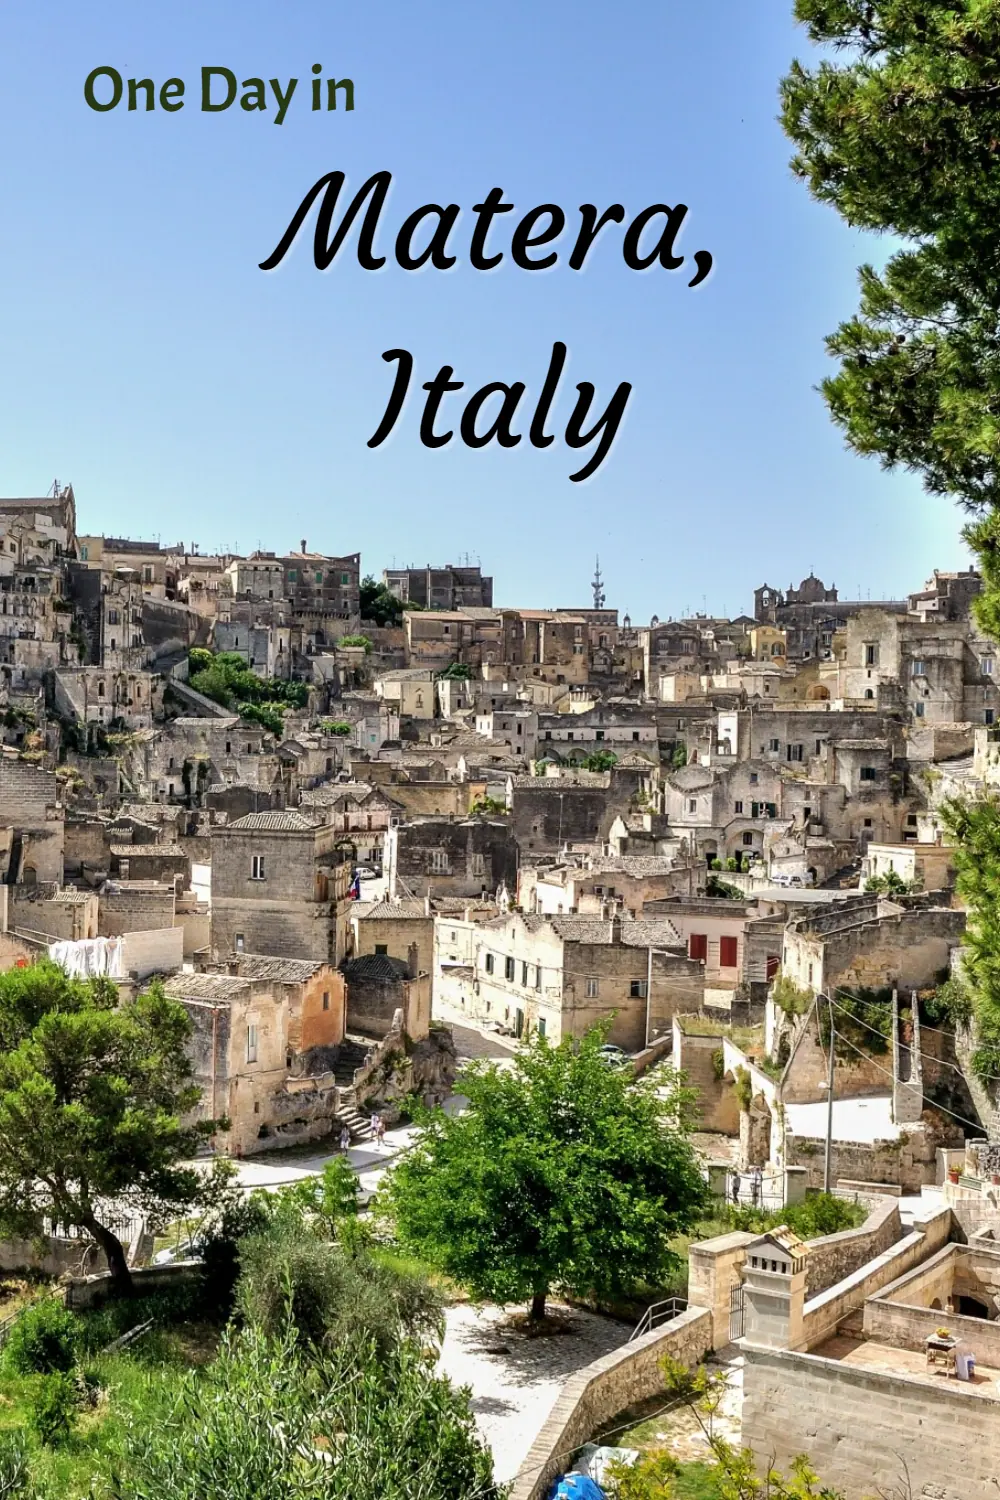 Wondering how to make the most out of your visit to Matera? Check out this comprehensive guide for everything you need to know. From choosing the perfect cave hotel to discovering Matera's secret alleys and historic sites, this Pinterest pin will help you plan an unforgettable Matera experience.